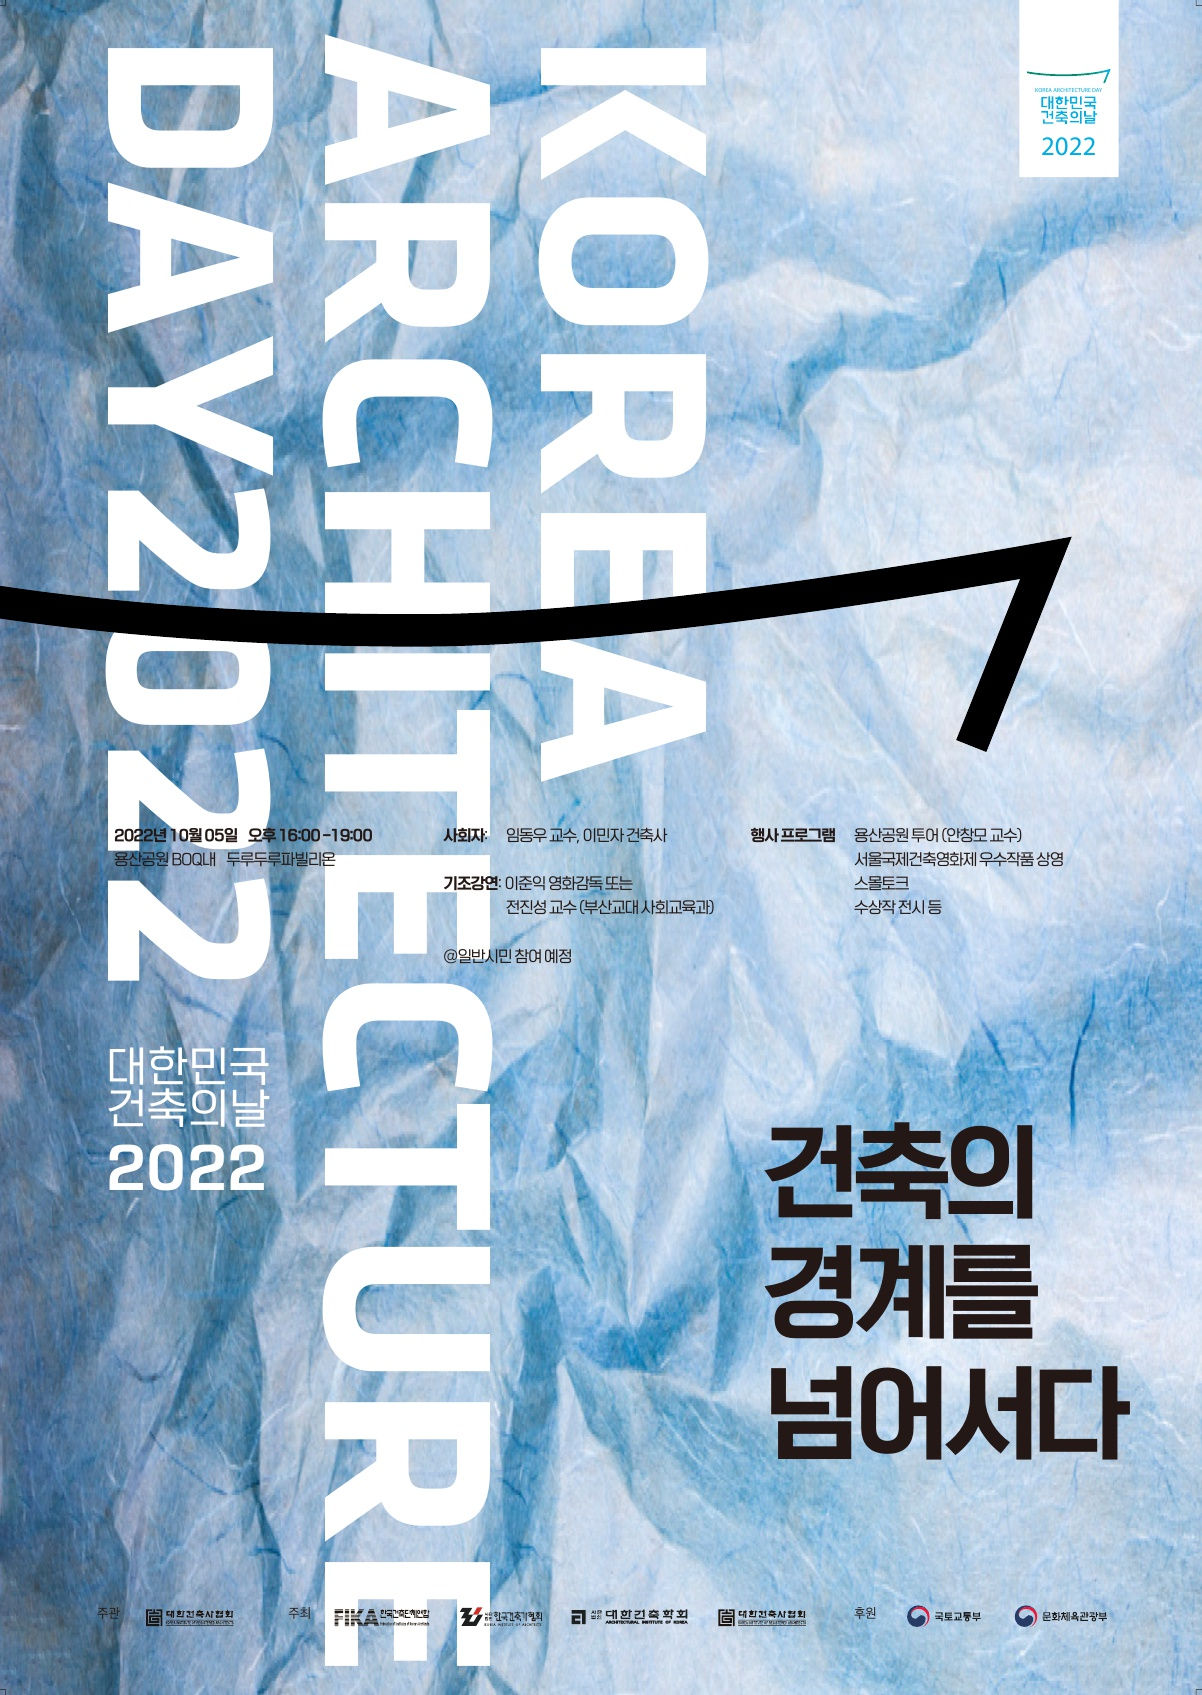 You are currently viewing 2022 건축의날 개최